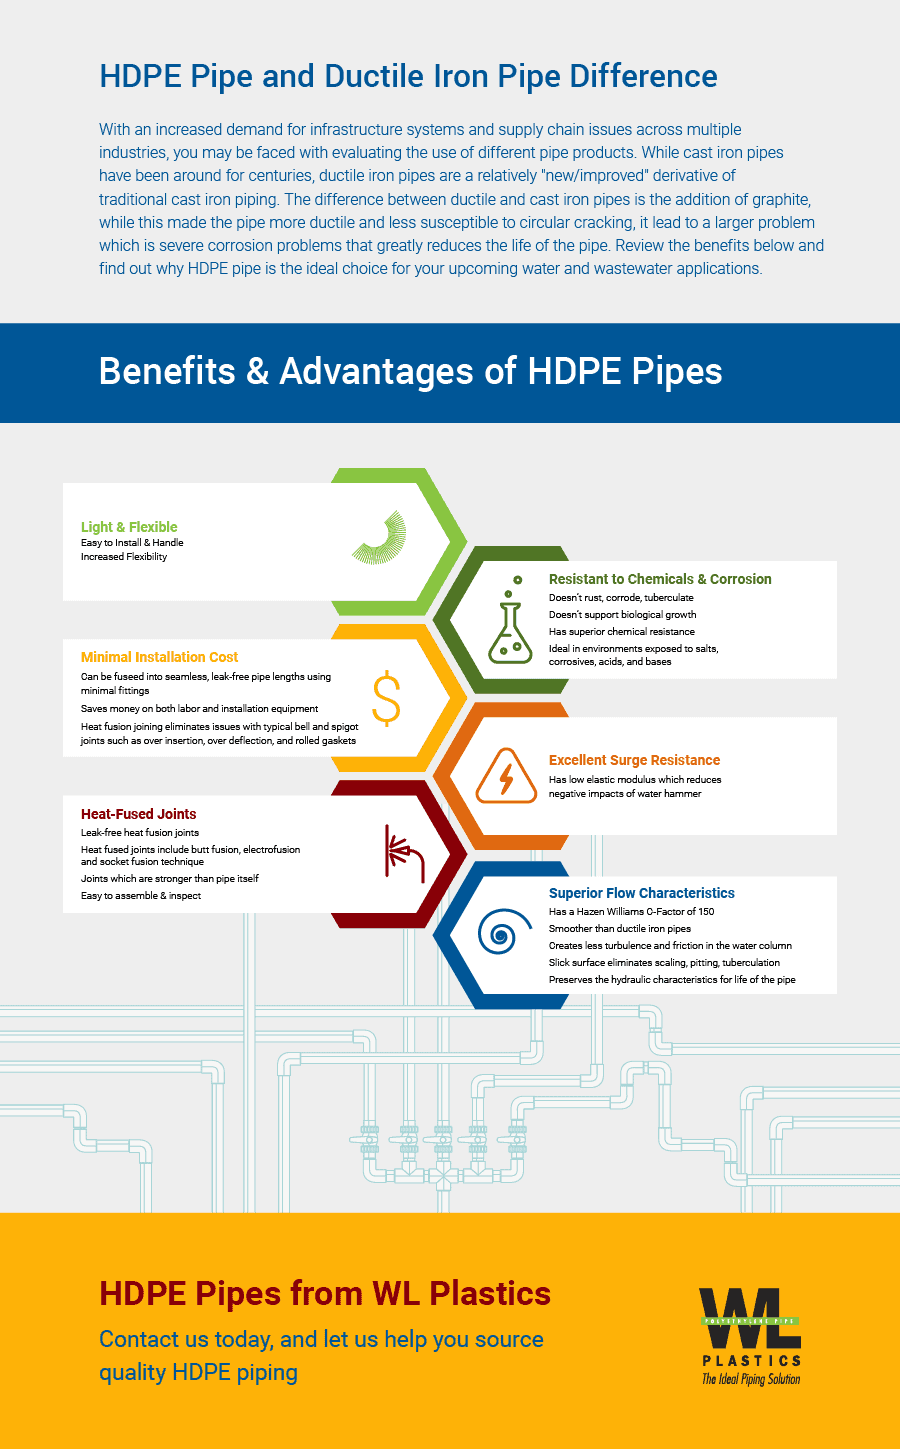 HDPE PIPE AND DUCTILE IRON PIPE DIFFERENCE